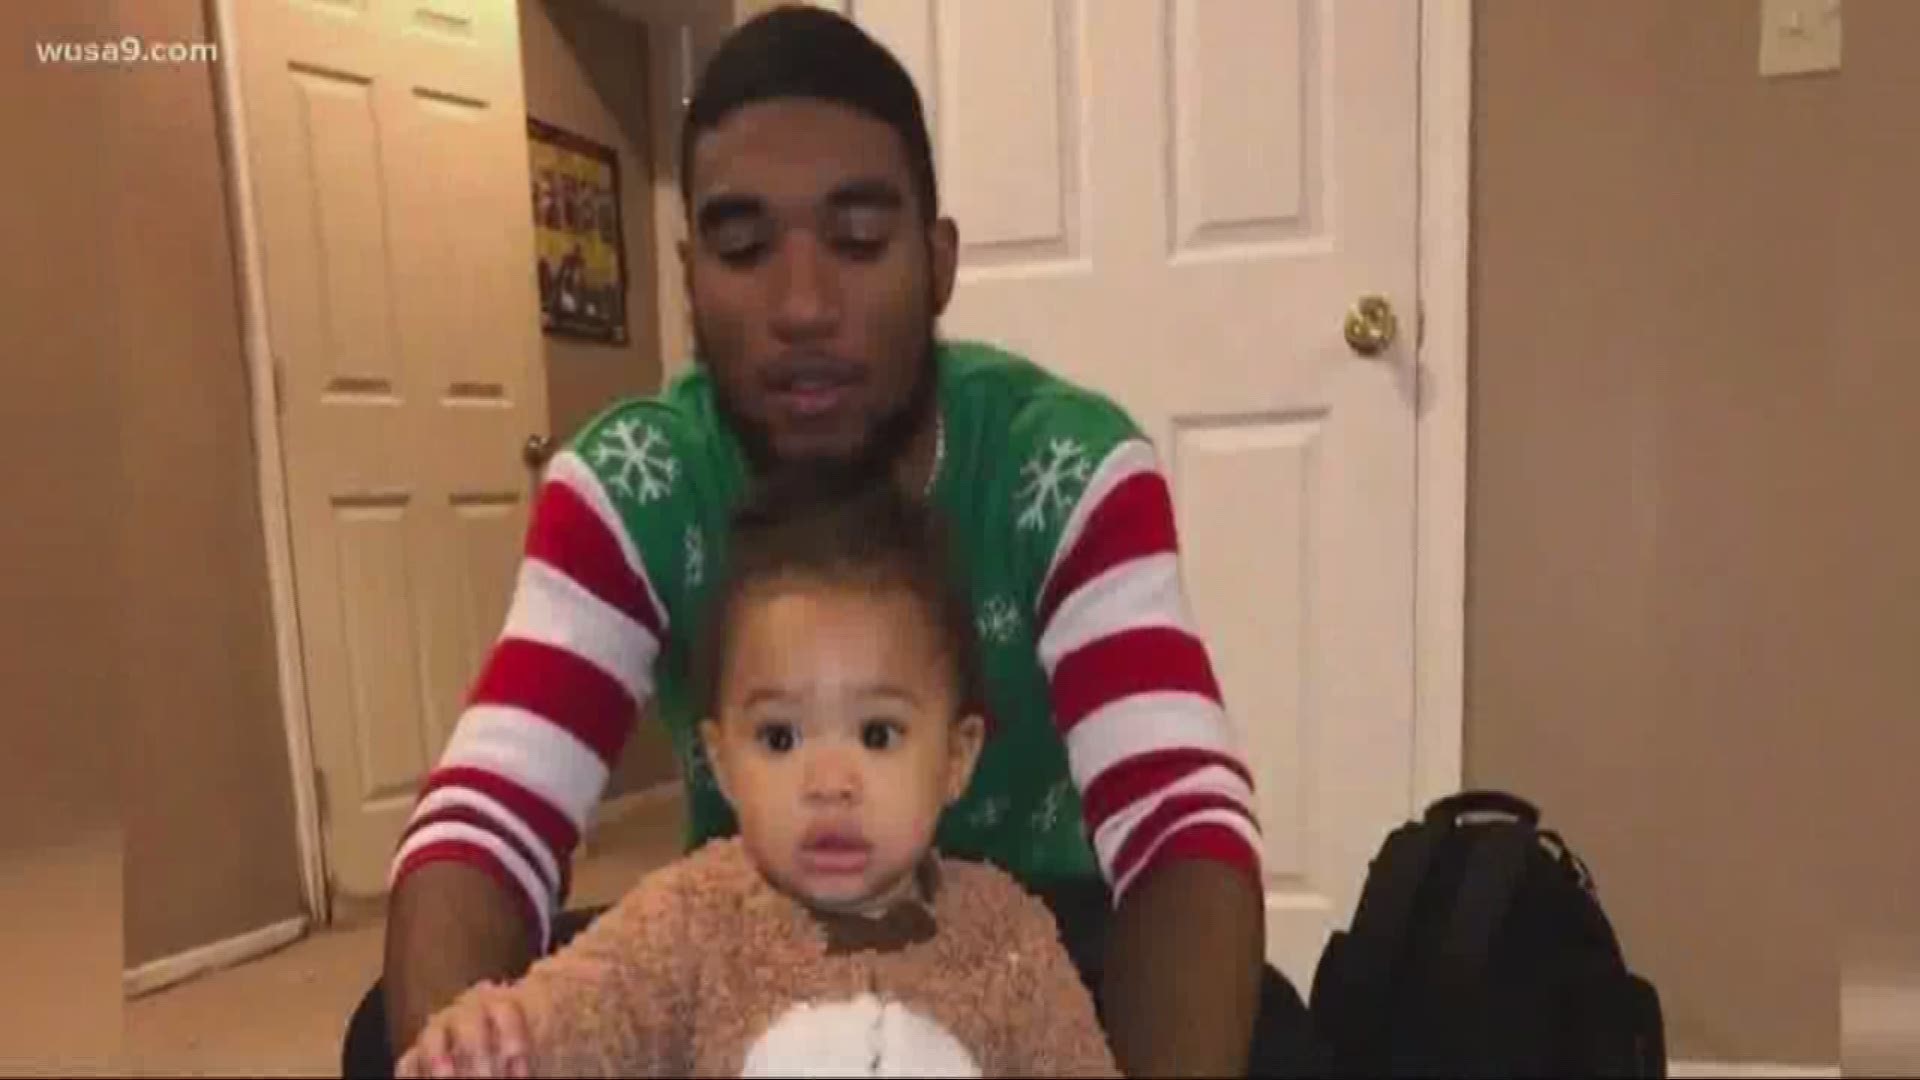 The 22-year-old was shot to death in Oxon Hill on December 30th, just after watching his daughter open the presents that are still piled under the Christmas tree.